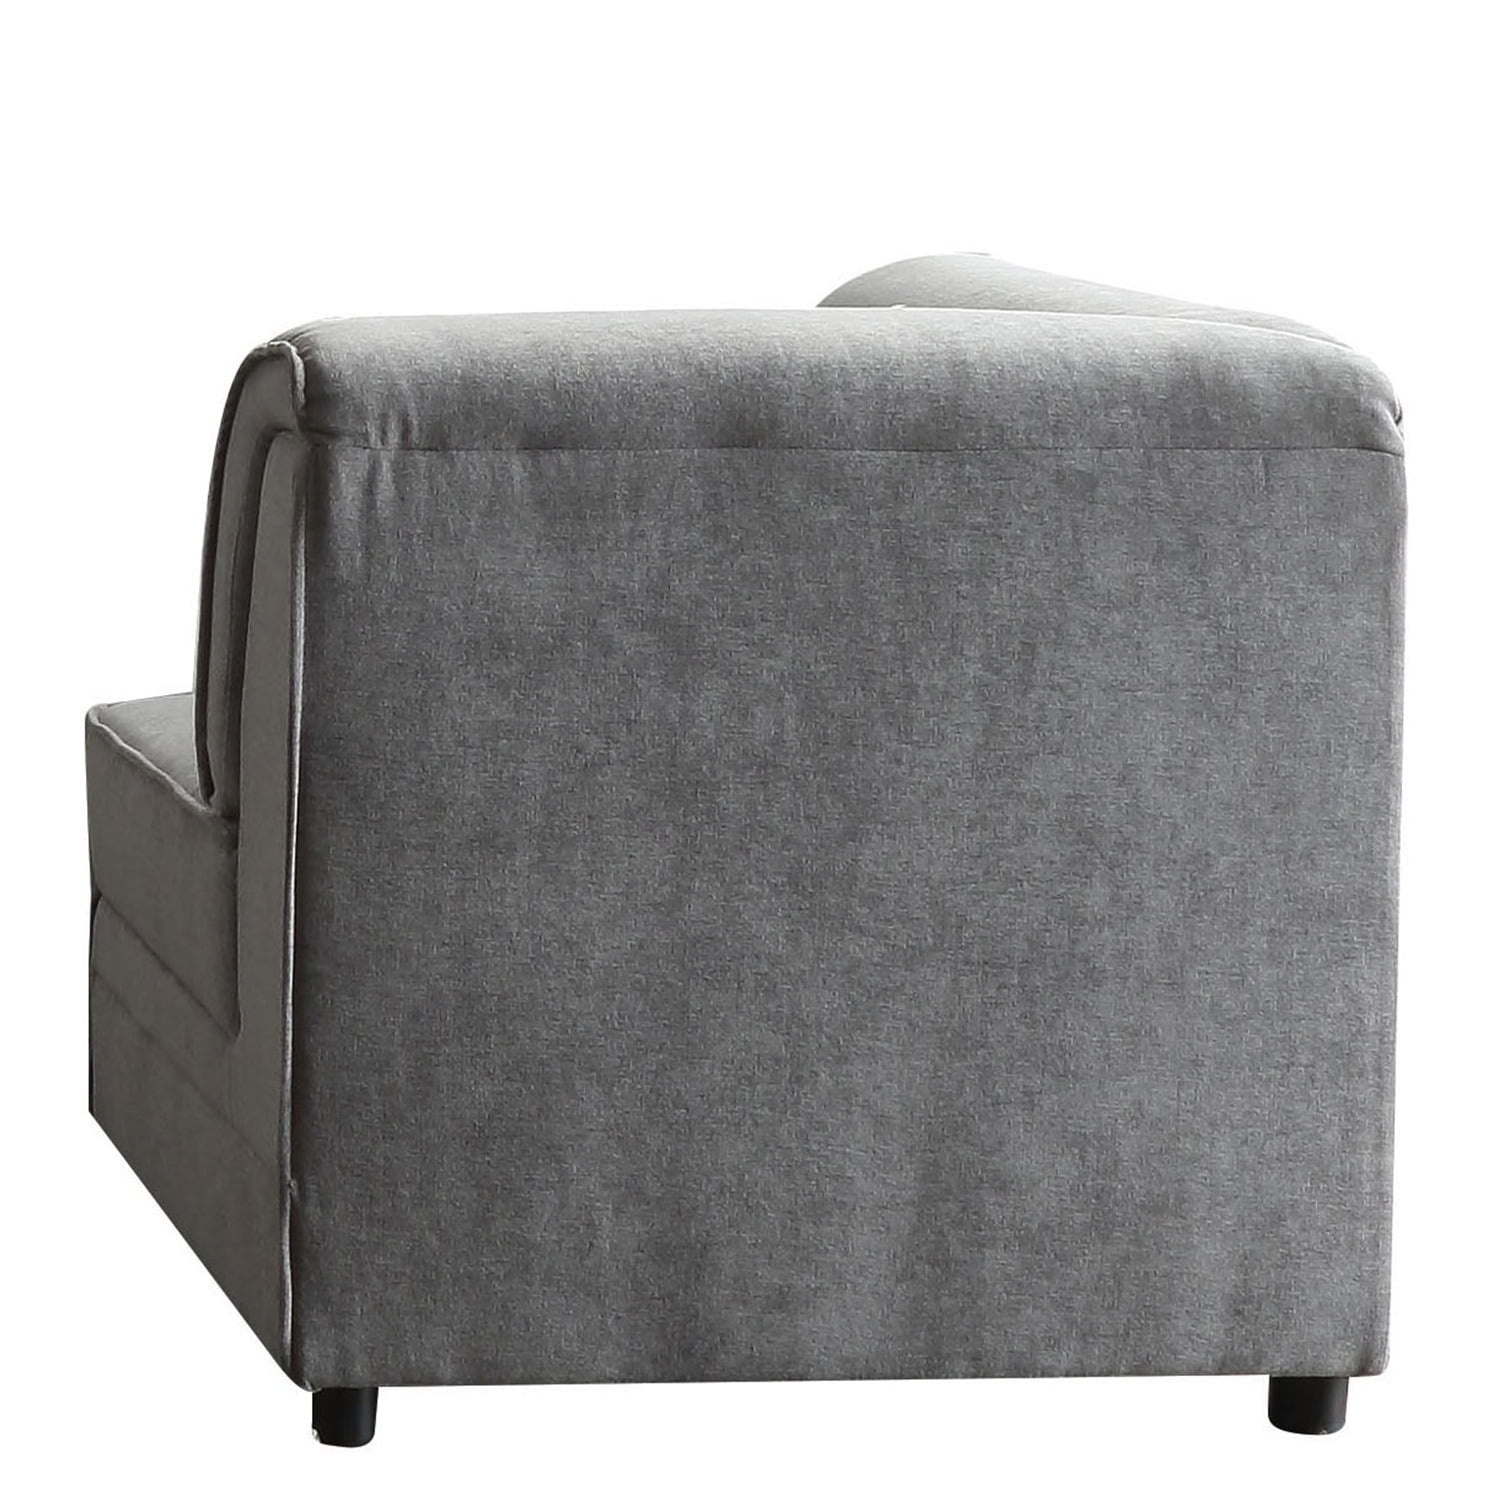 Picture of ACME 53781 Bois Modular Wedge with 1 Pillow - Gray Velvet - 33 x 34 x 34 in.